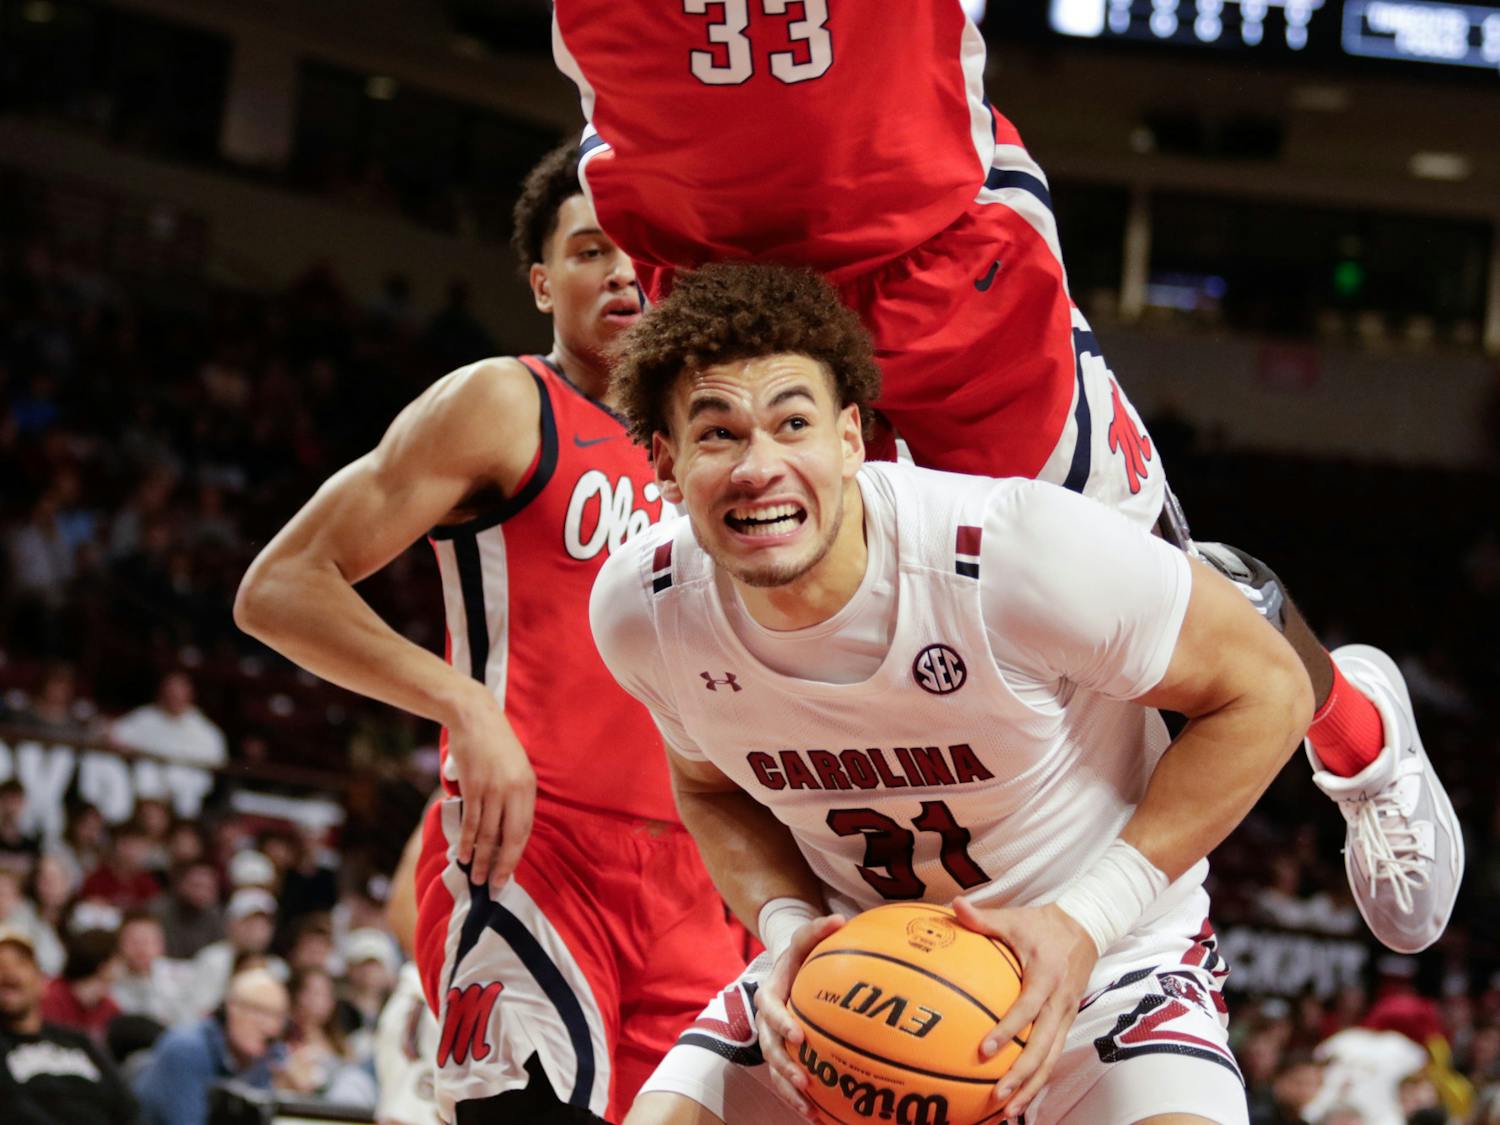 Redshirt junior forward Benjamin Bosmans-Verdonk gets fouled by a player from Ole Miss during the first half of the game at Colonial Life Arena on Jan. 17, 2023. The South Carolina Gamecocks lost to the Rebels 70-58.